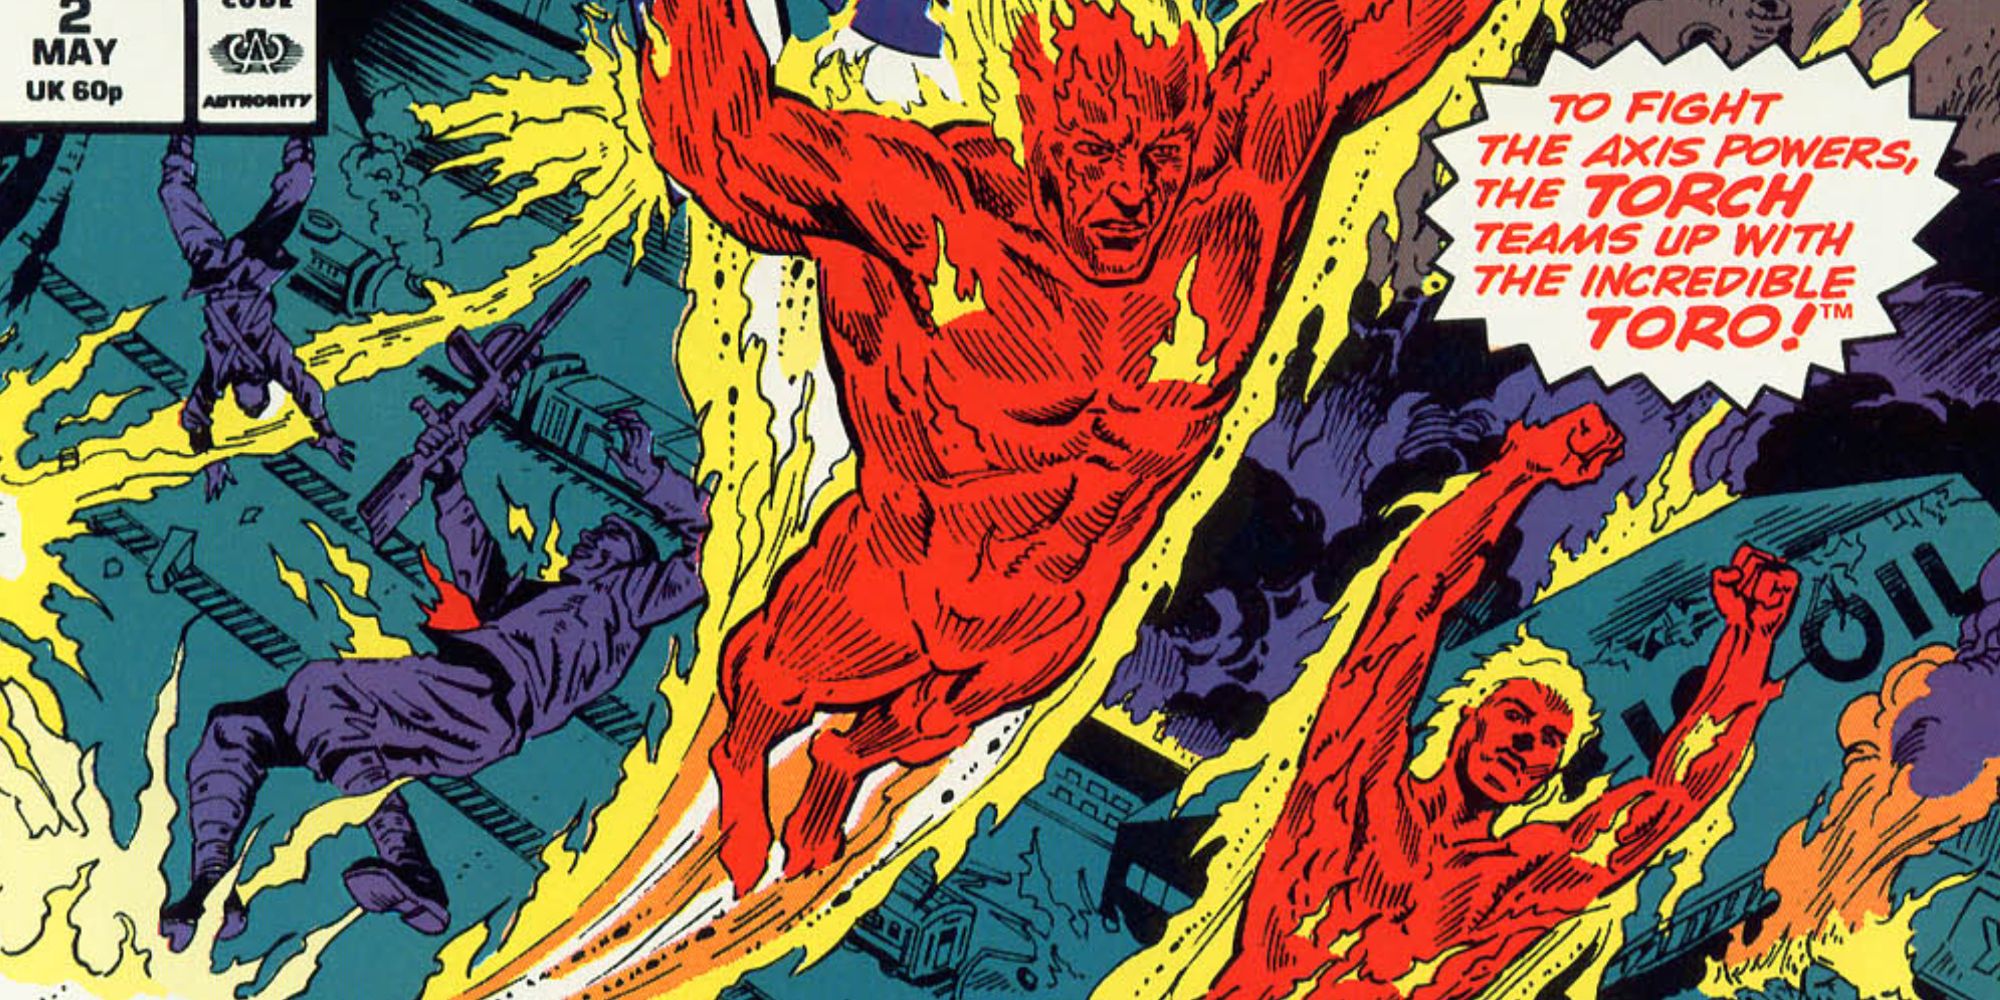 The Human Torch and Toro fly in Marvel Comics.